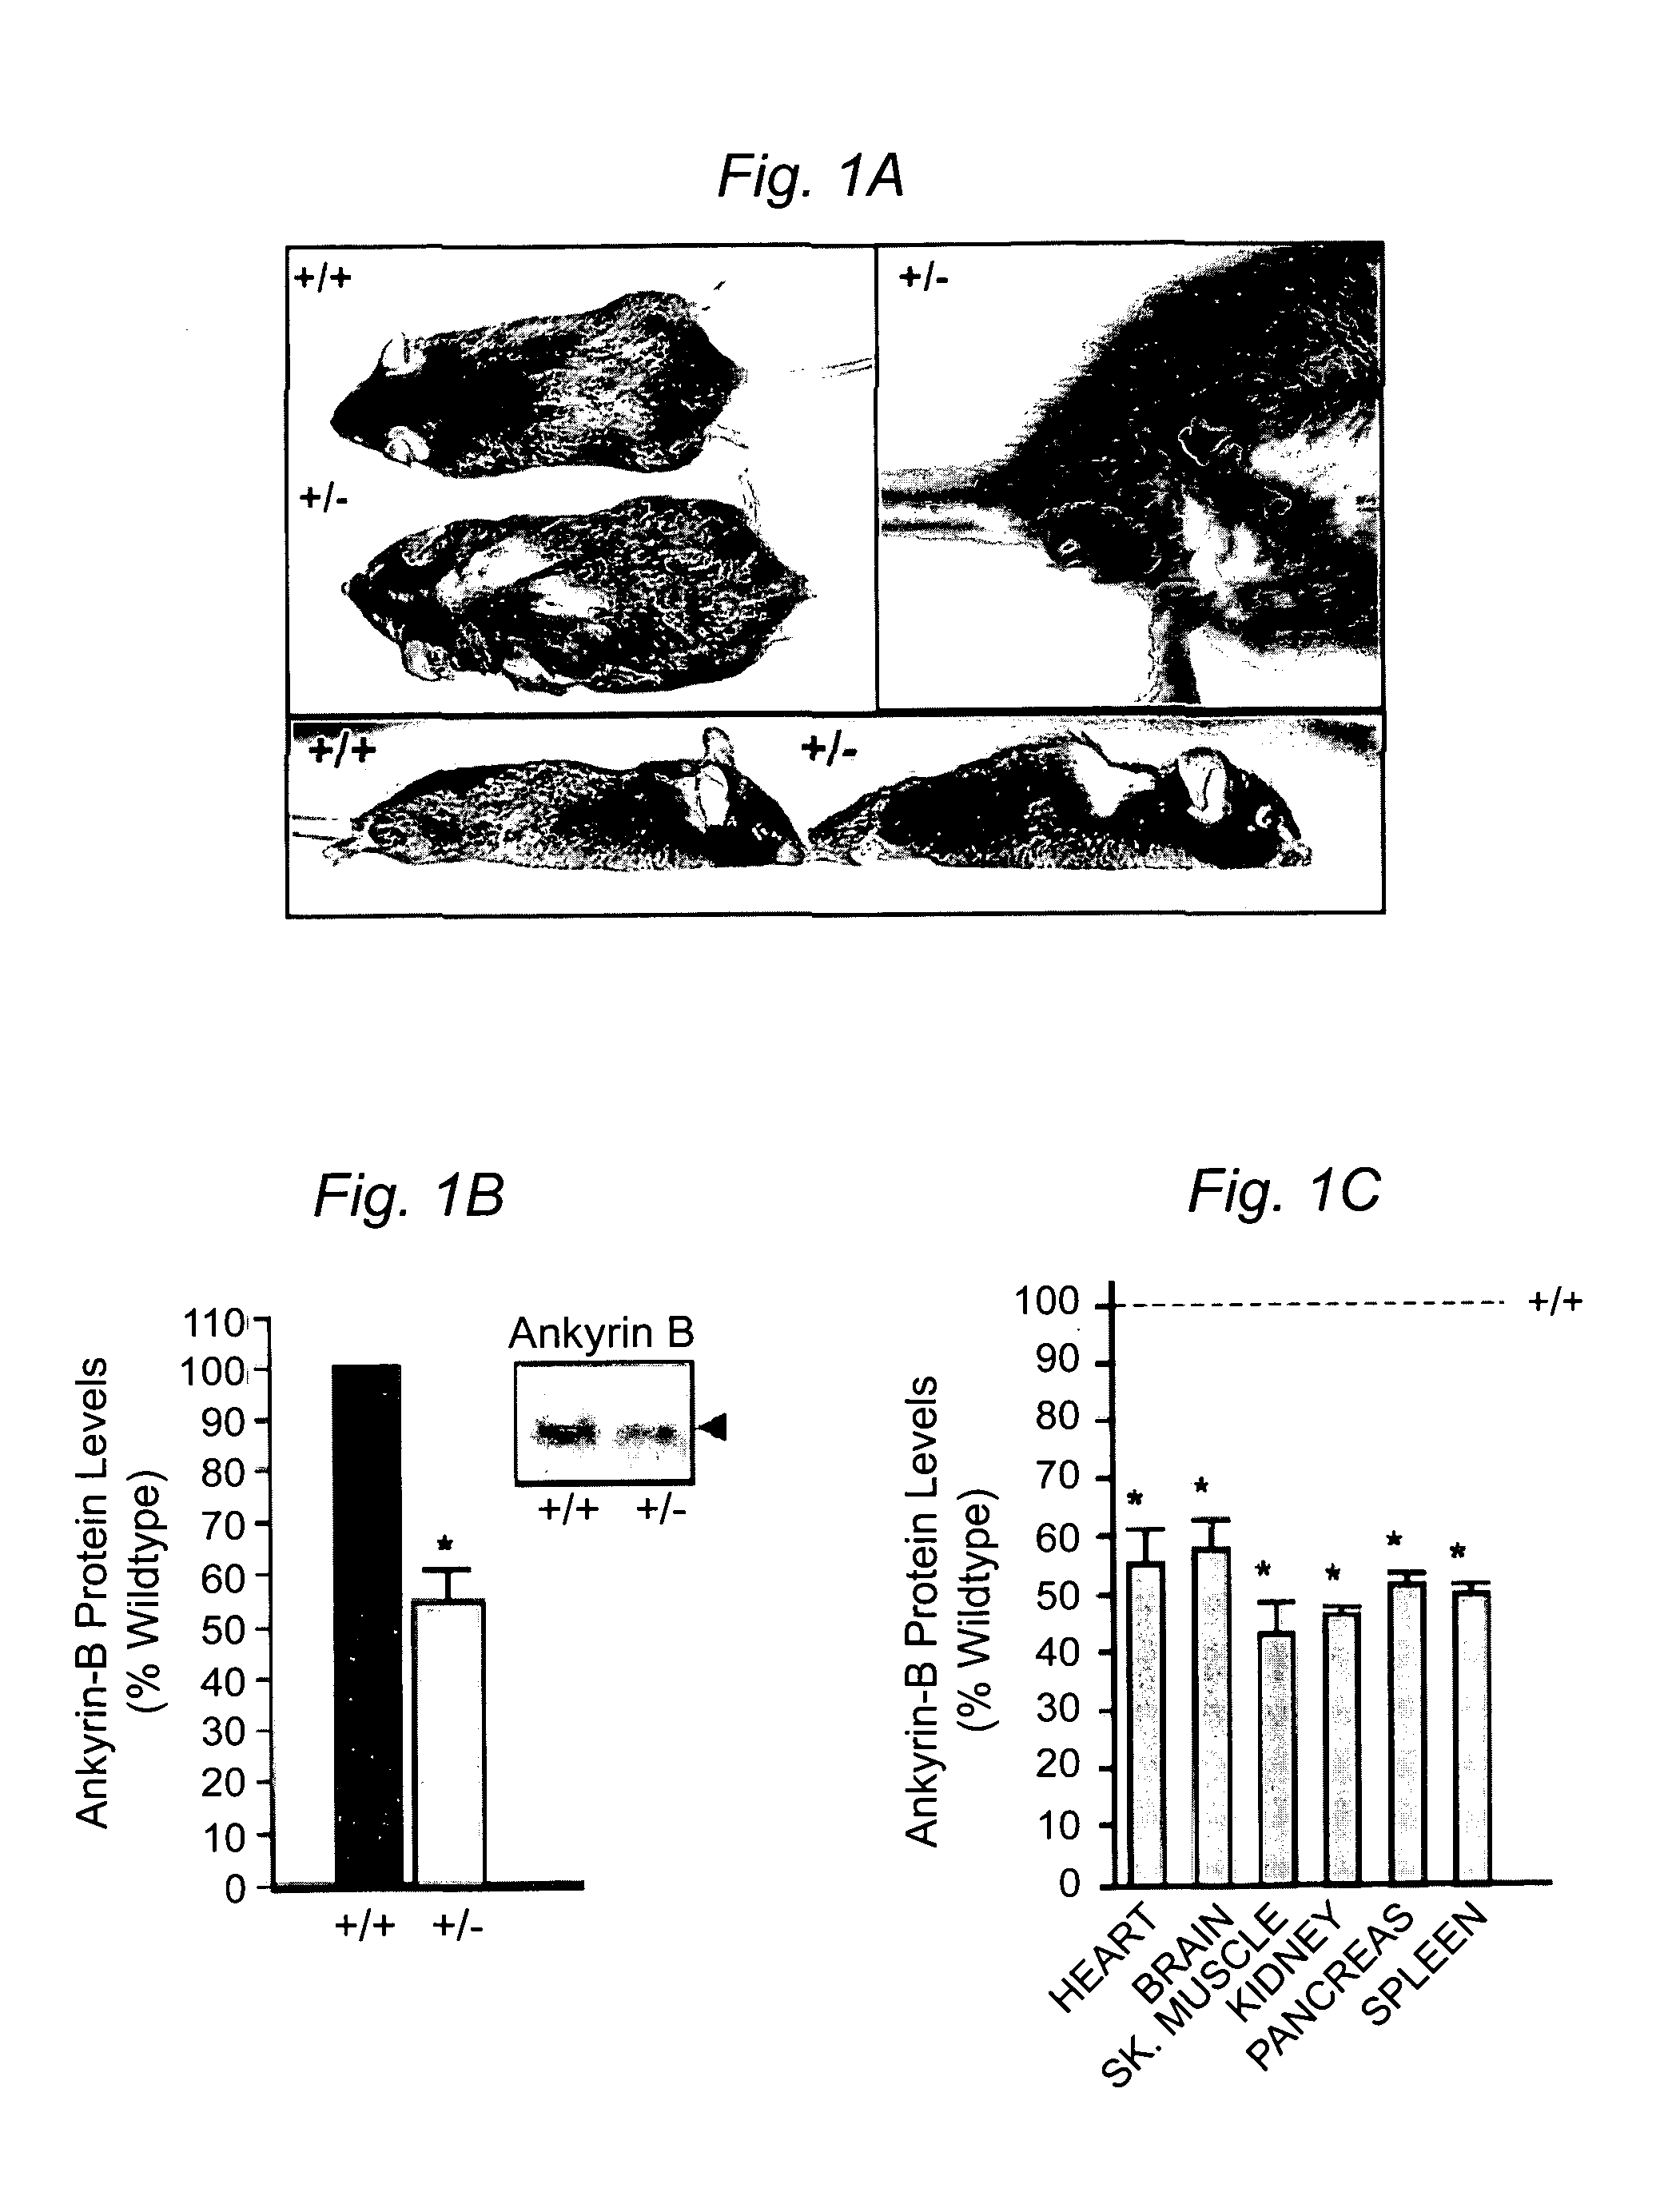 Methods of modulating localization and physiological function of IP3 receptors